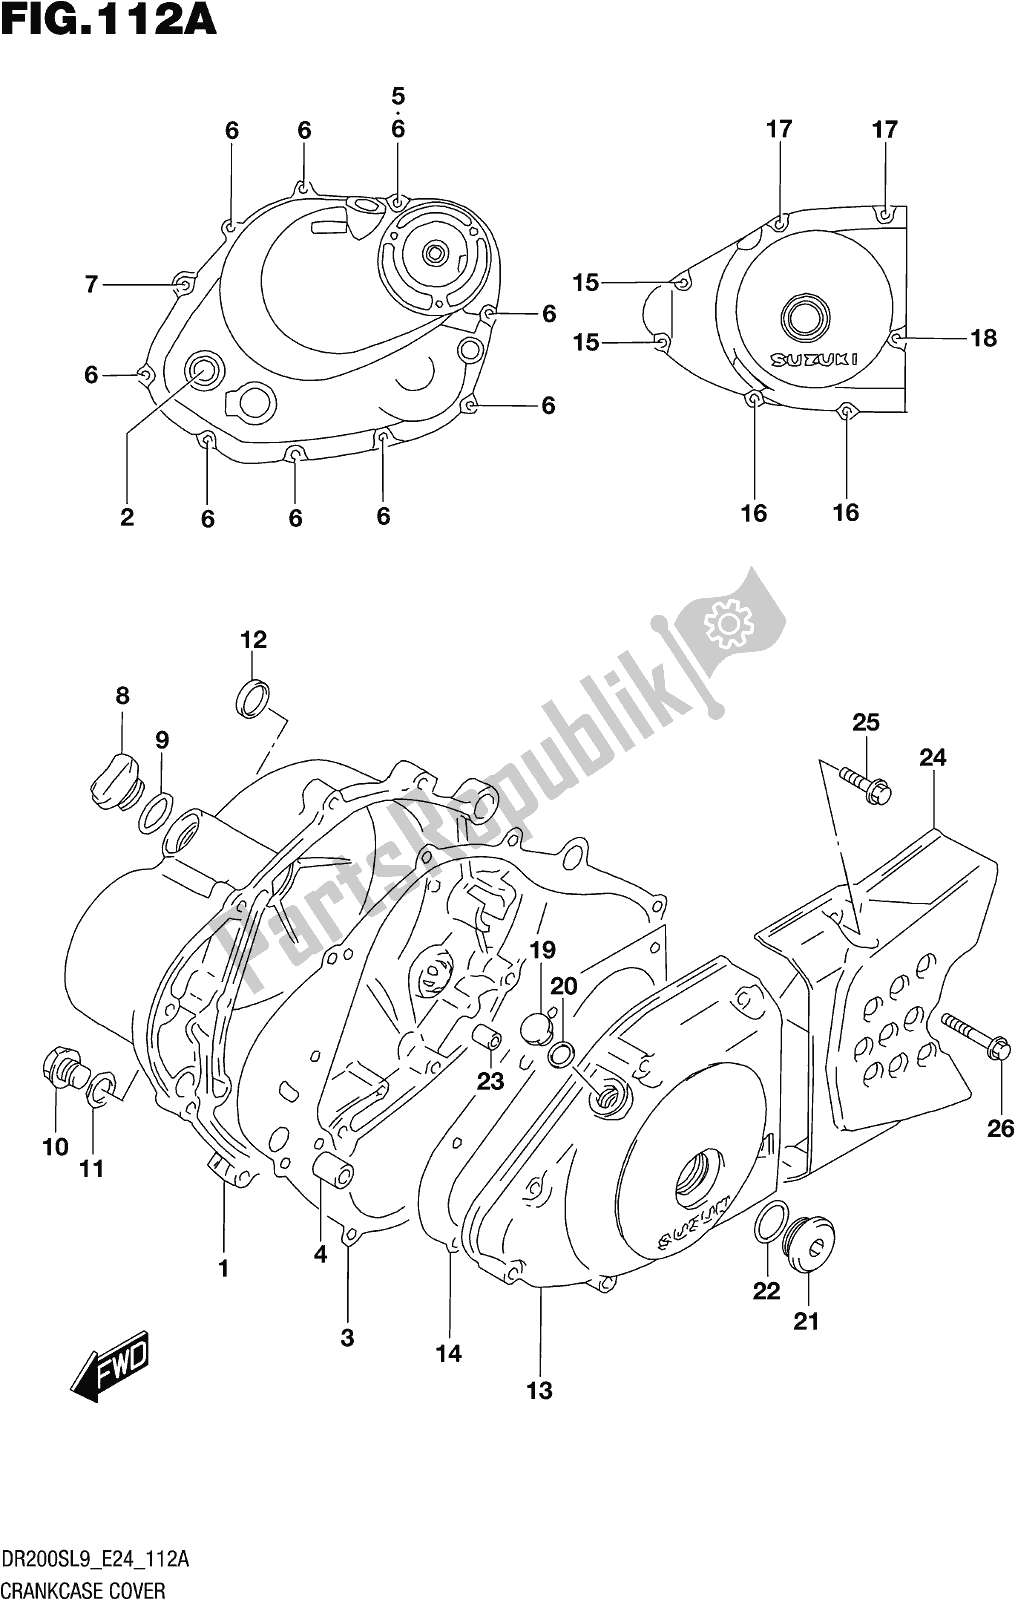 All parts for the Fig. 112a Crankcase Cover of the Suzuki DR 200S 2019